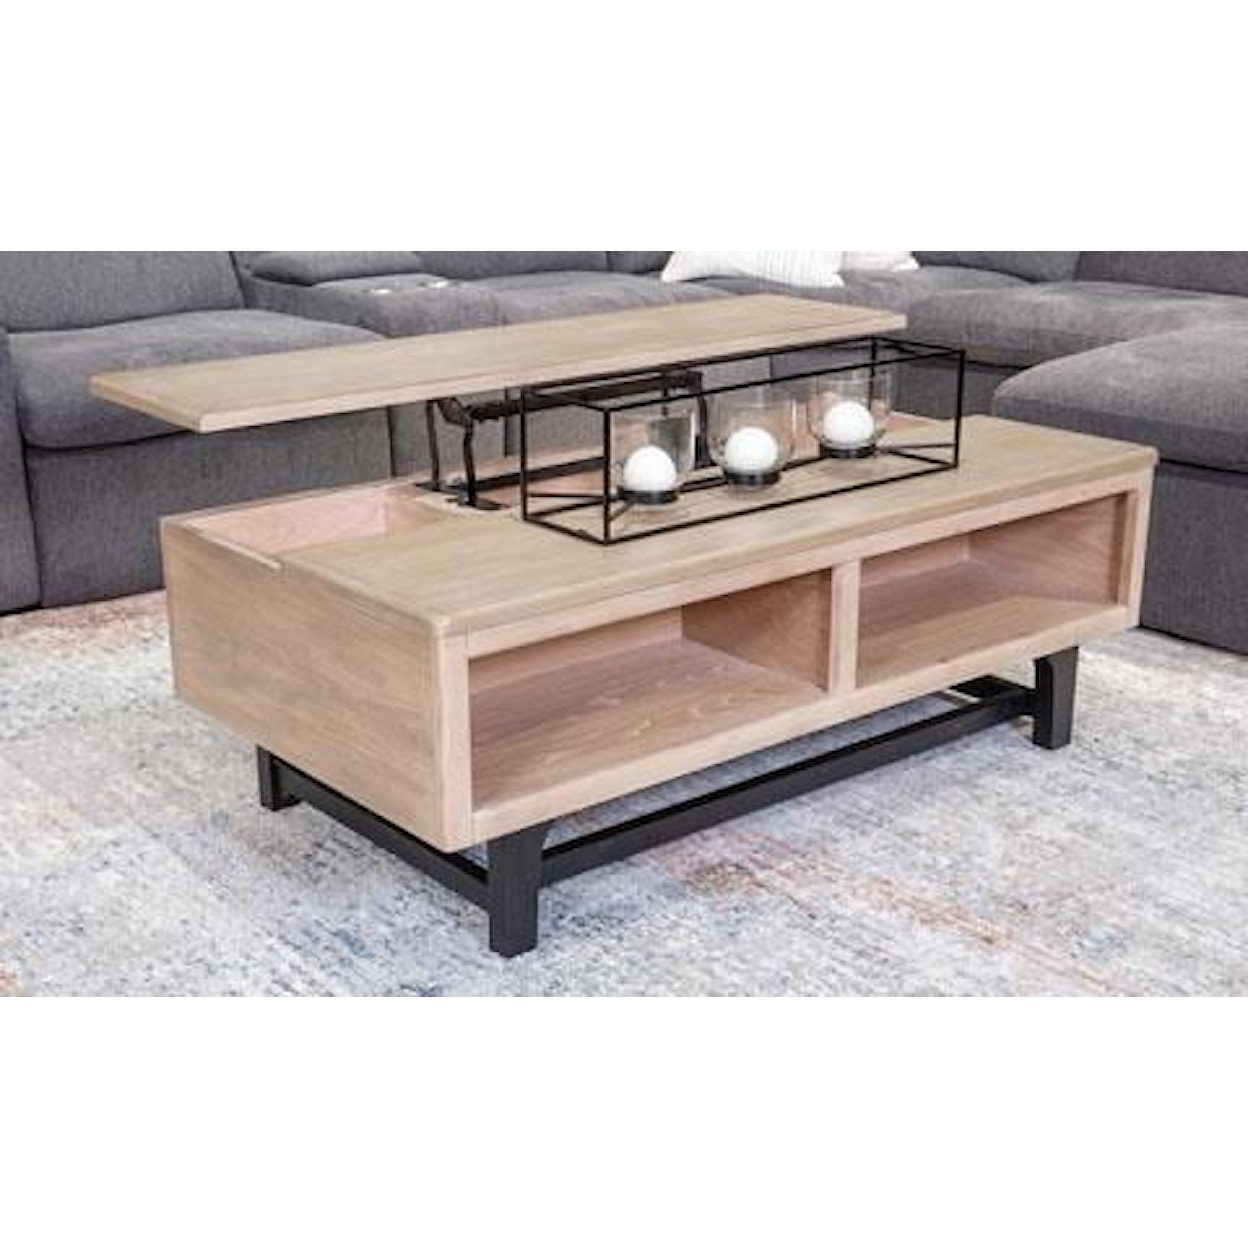 Signature Design by Ashley Freslowe Lift-Top Coffee Table